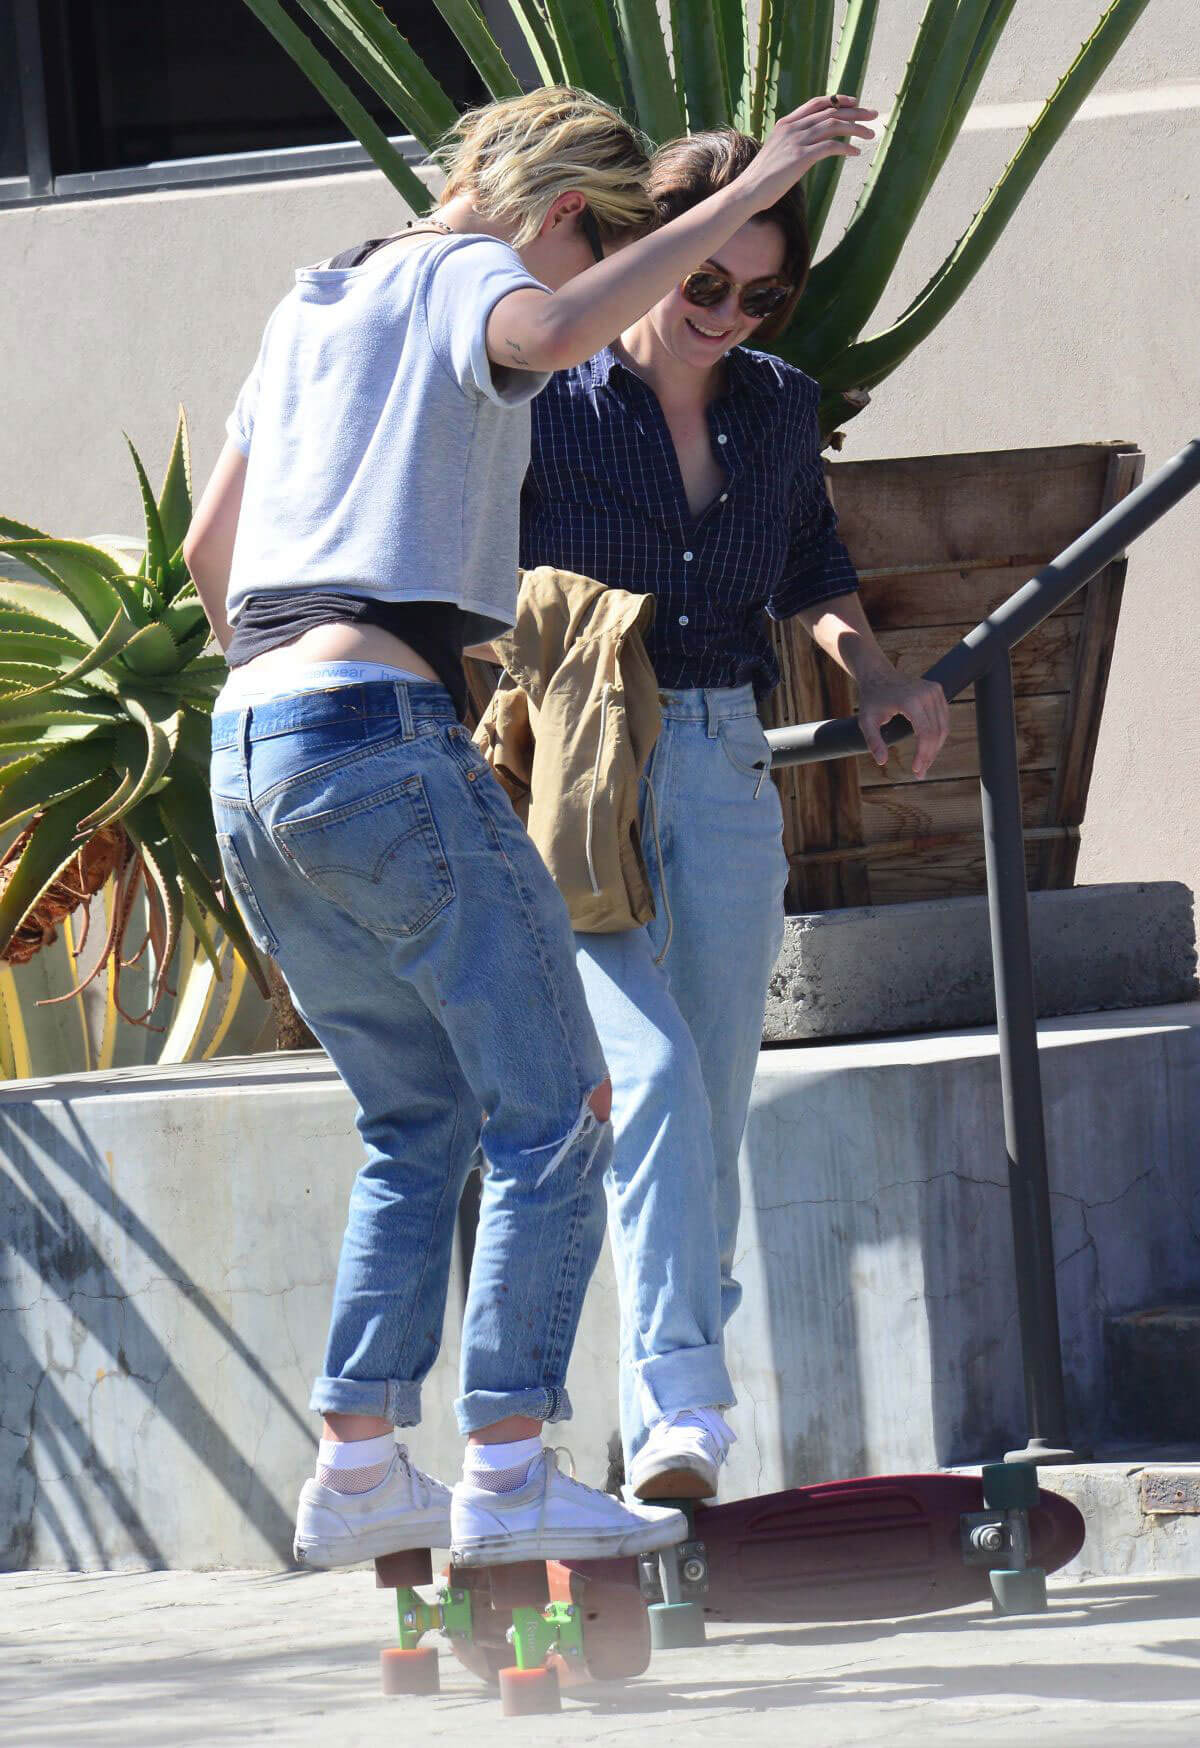 Kristen Stewart in Ripped Jeans Out in West Hollywood - 16/09/2016 16